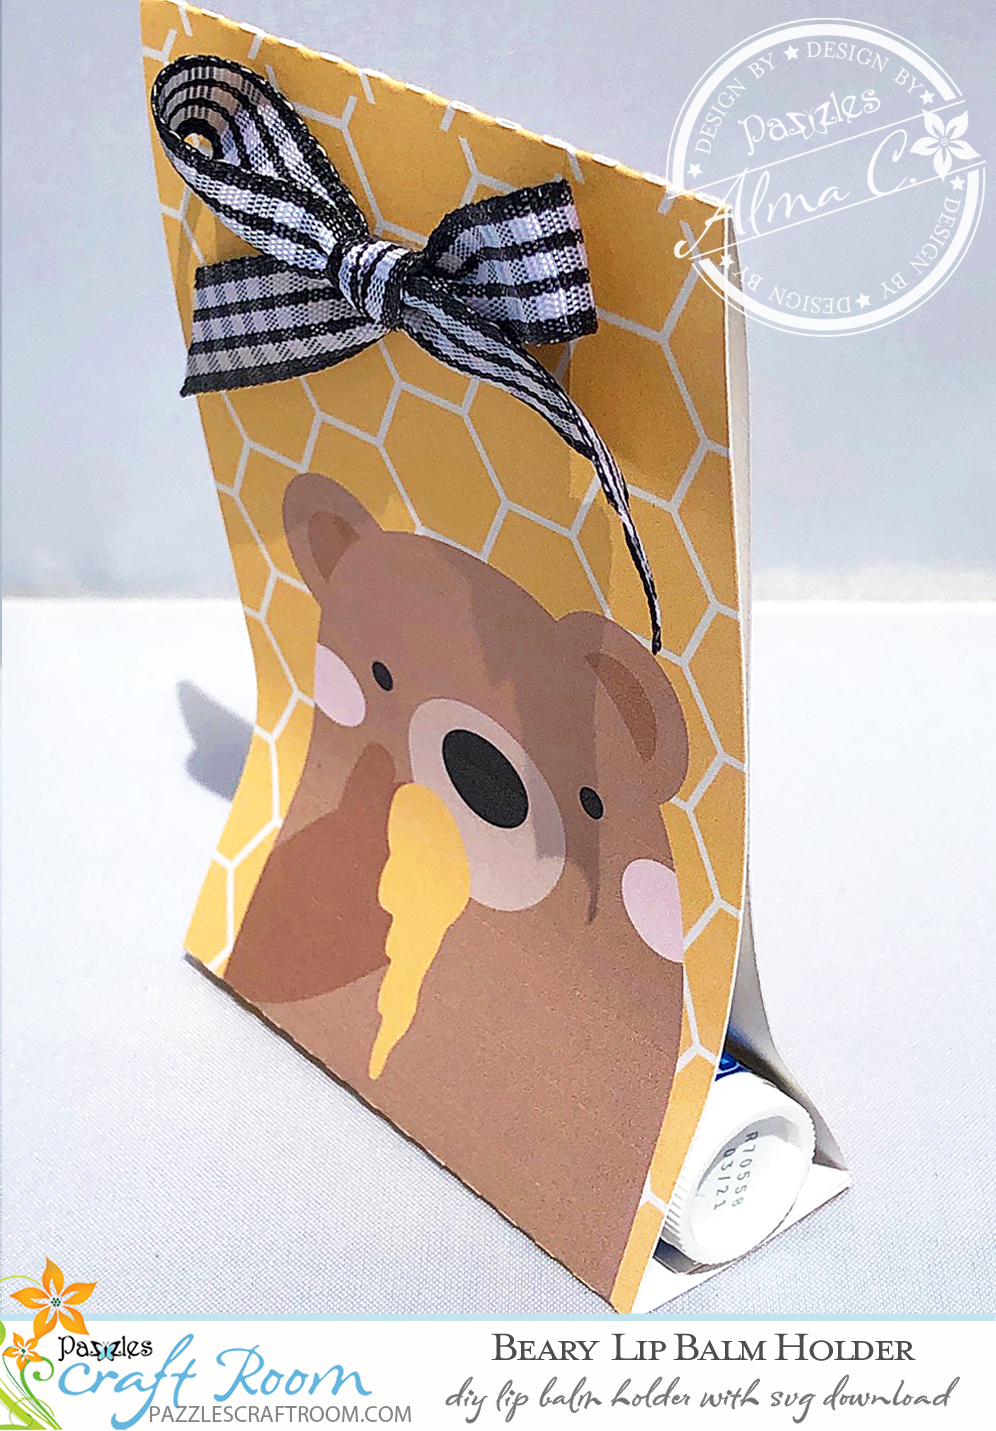 DIY Honey Bear Lip Balm Holder with instant SVG download. Compatible with all major electronic cutters including Pazzles Inspiration, Cricut, and Silhouette Cameo. Design by Alma Cervantes.